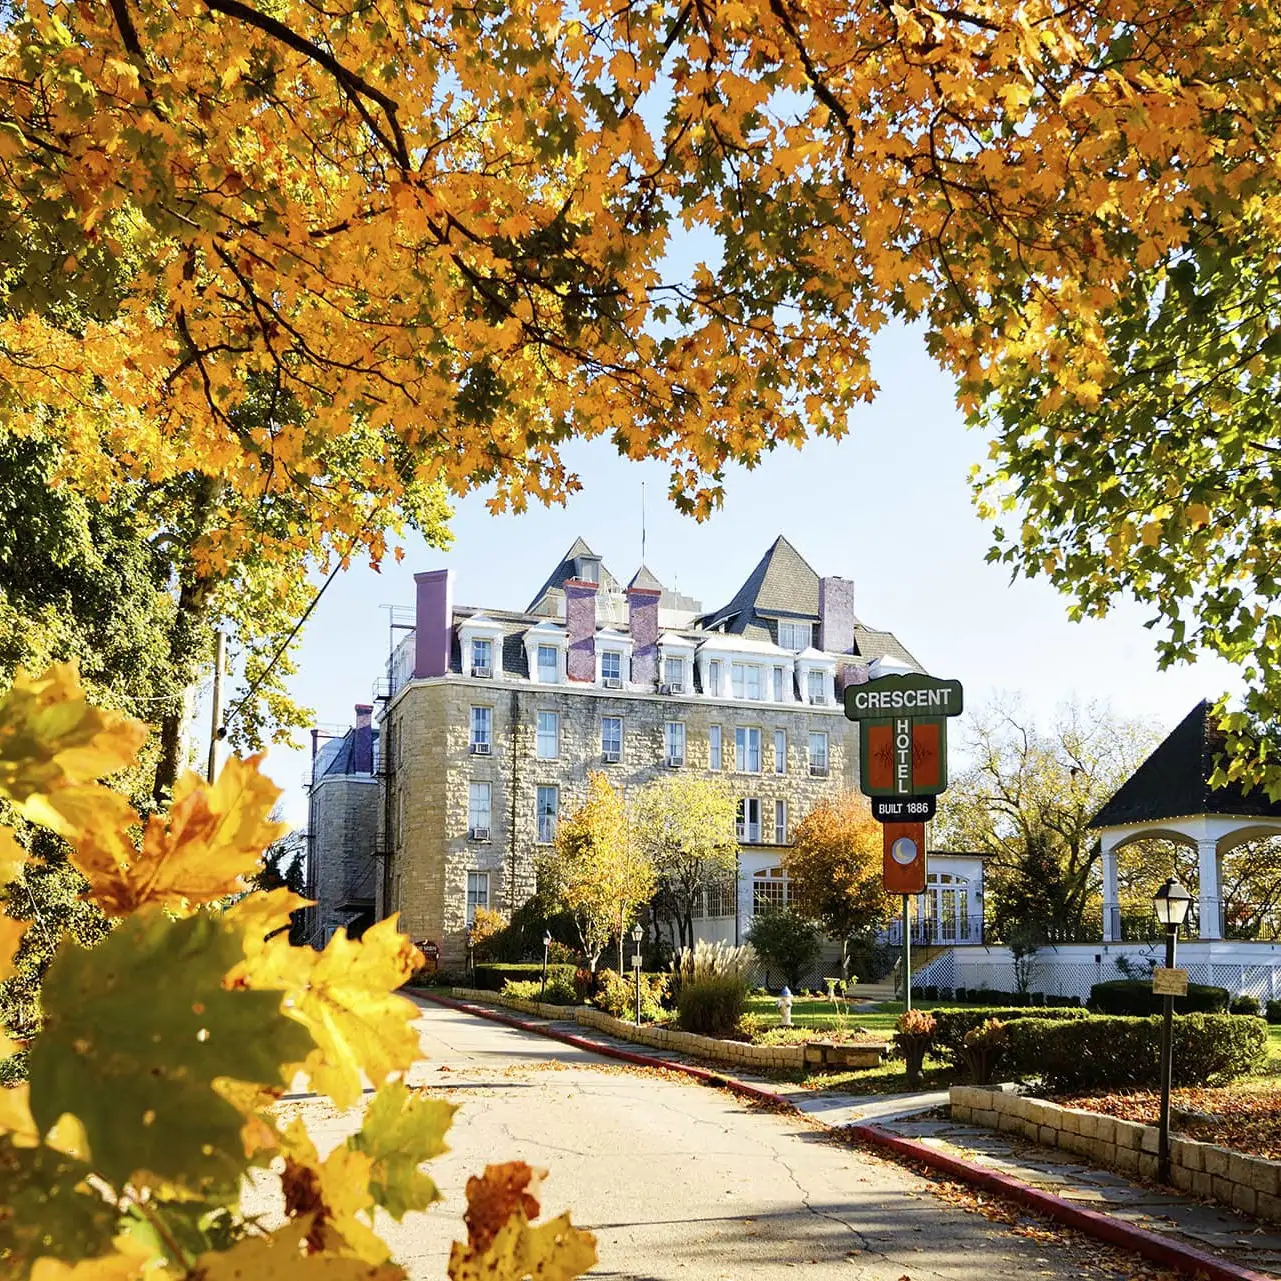 The Crescent Hotel in Autumn Leaves - Eureka Springs, Arkansas Photography